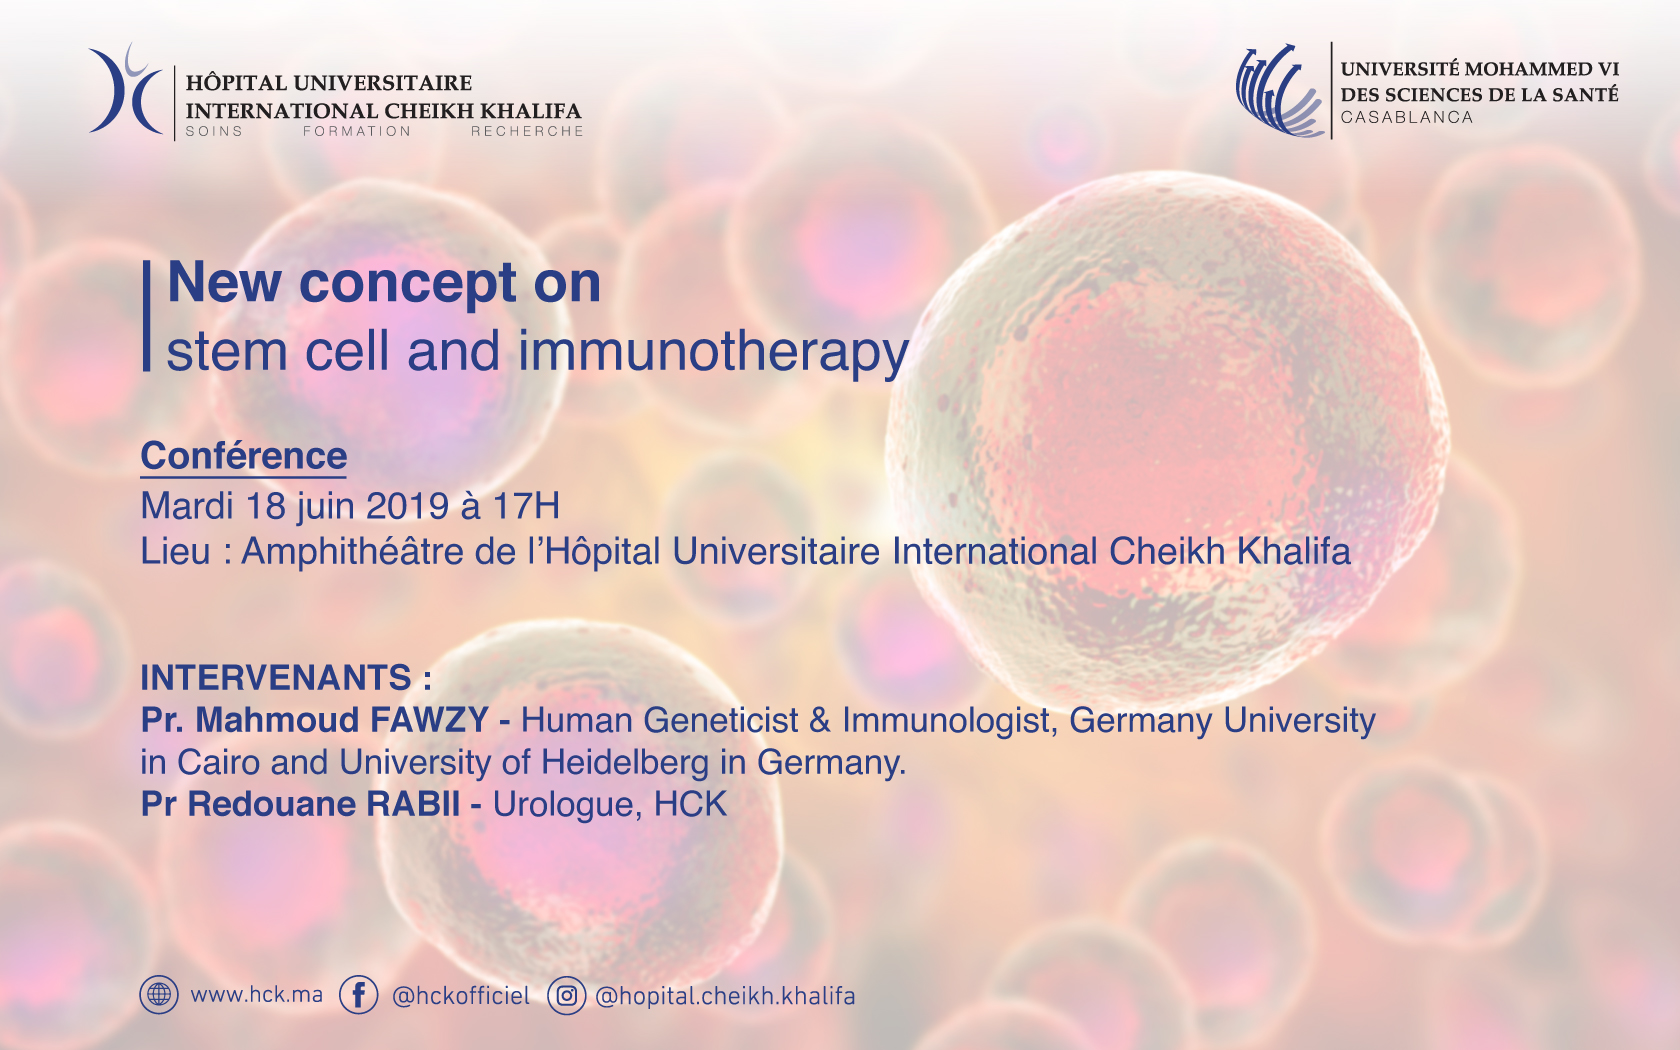 Conférence : New concept on stem cell and immunotherapy 